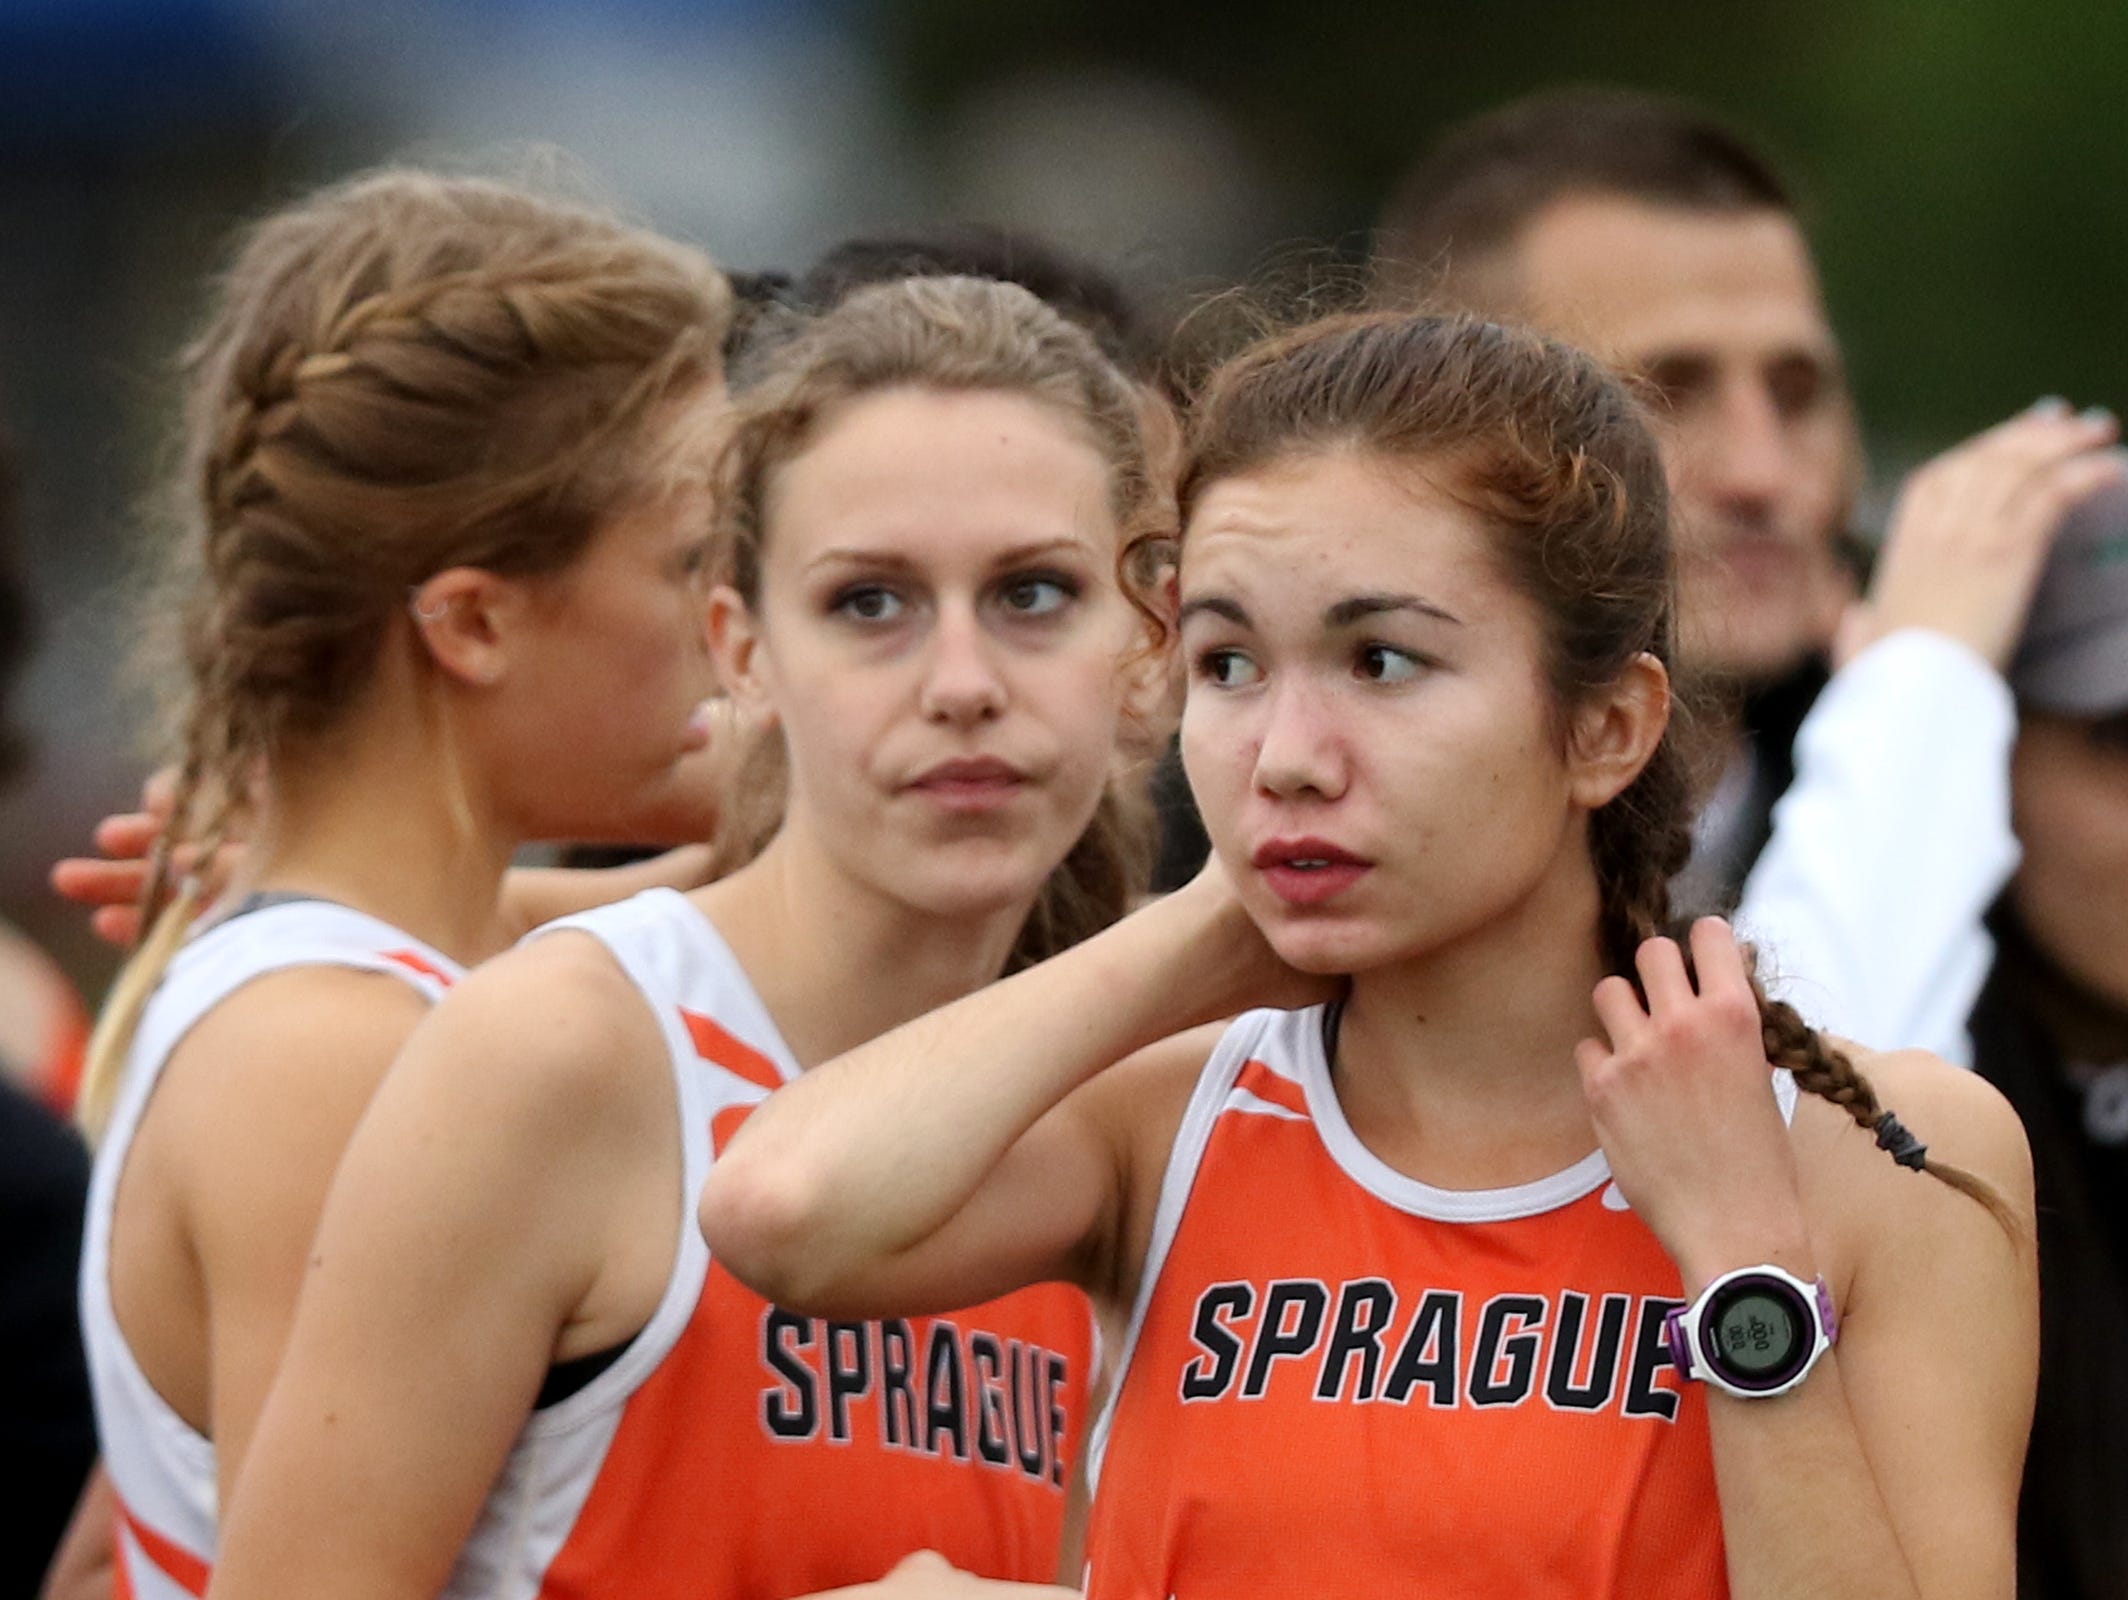 Sprague runners prepare to compete in the Greater Valley Conference championship girl's 5K race at the Crystal Lake Sports Park in Corvallis on Wednesday, Oct. 26, 2016. Sprague's Ginger Murnieks finished first.